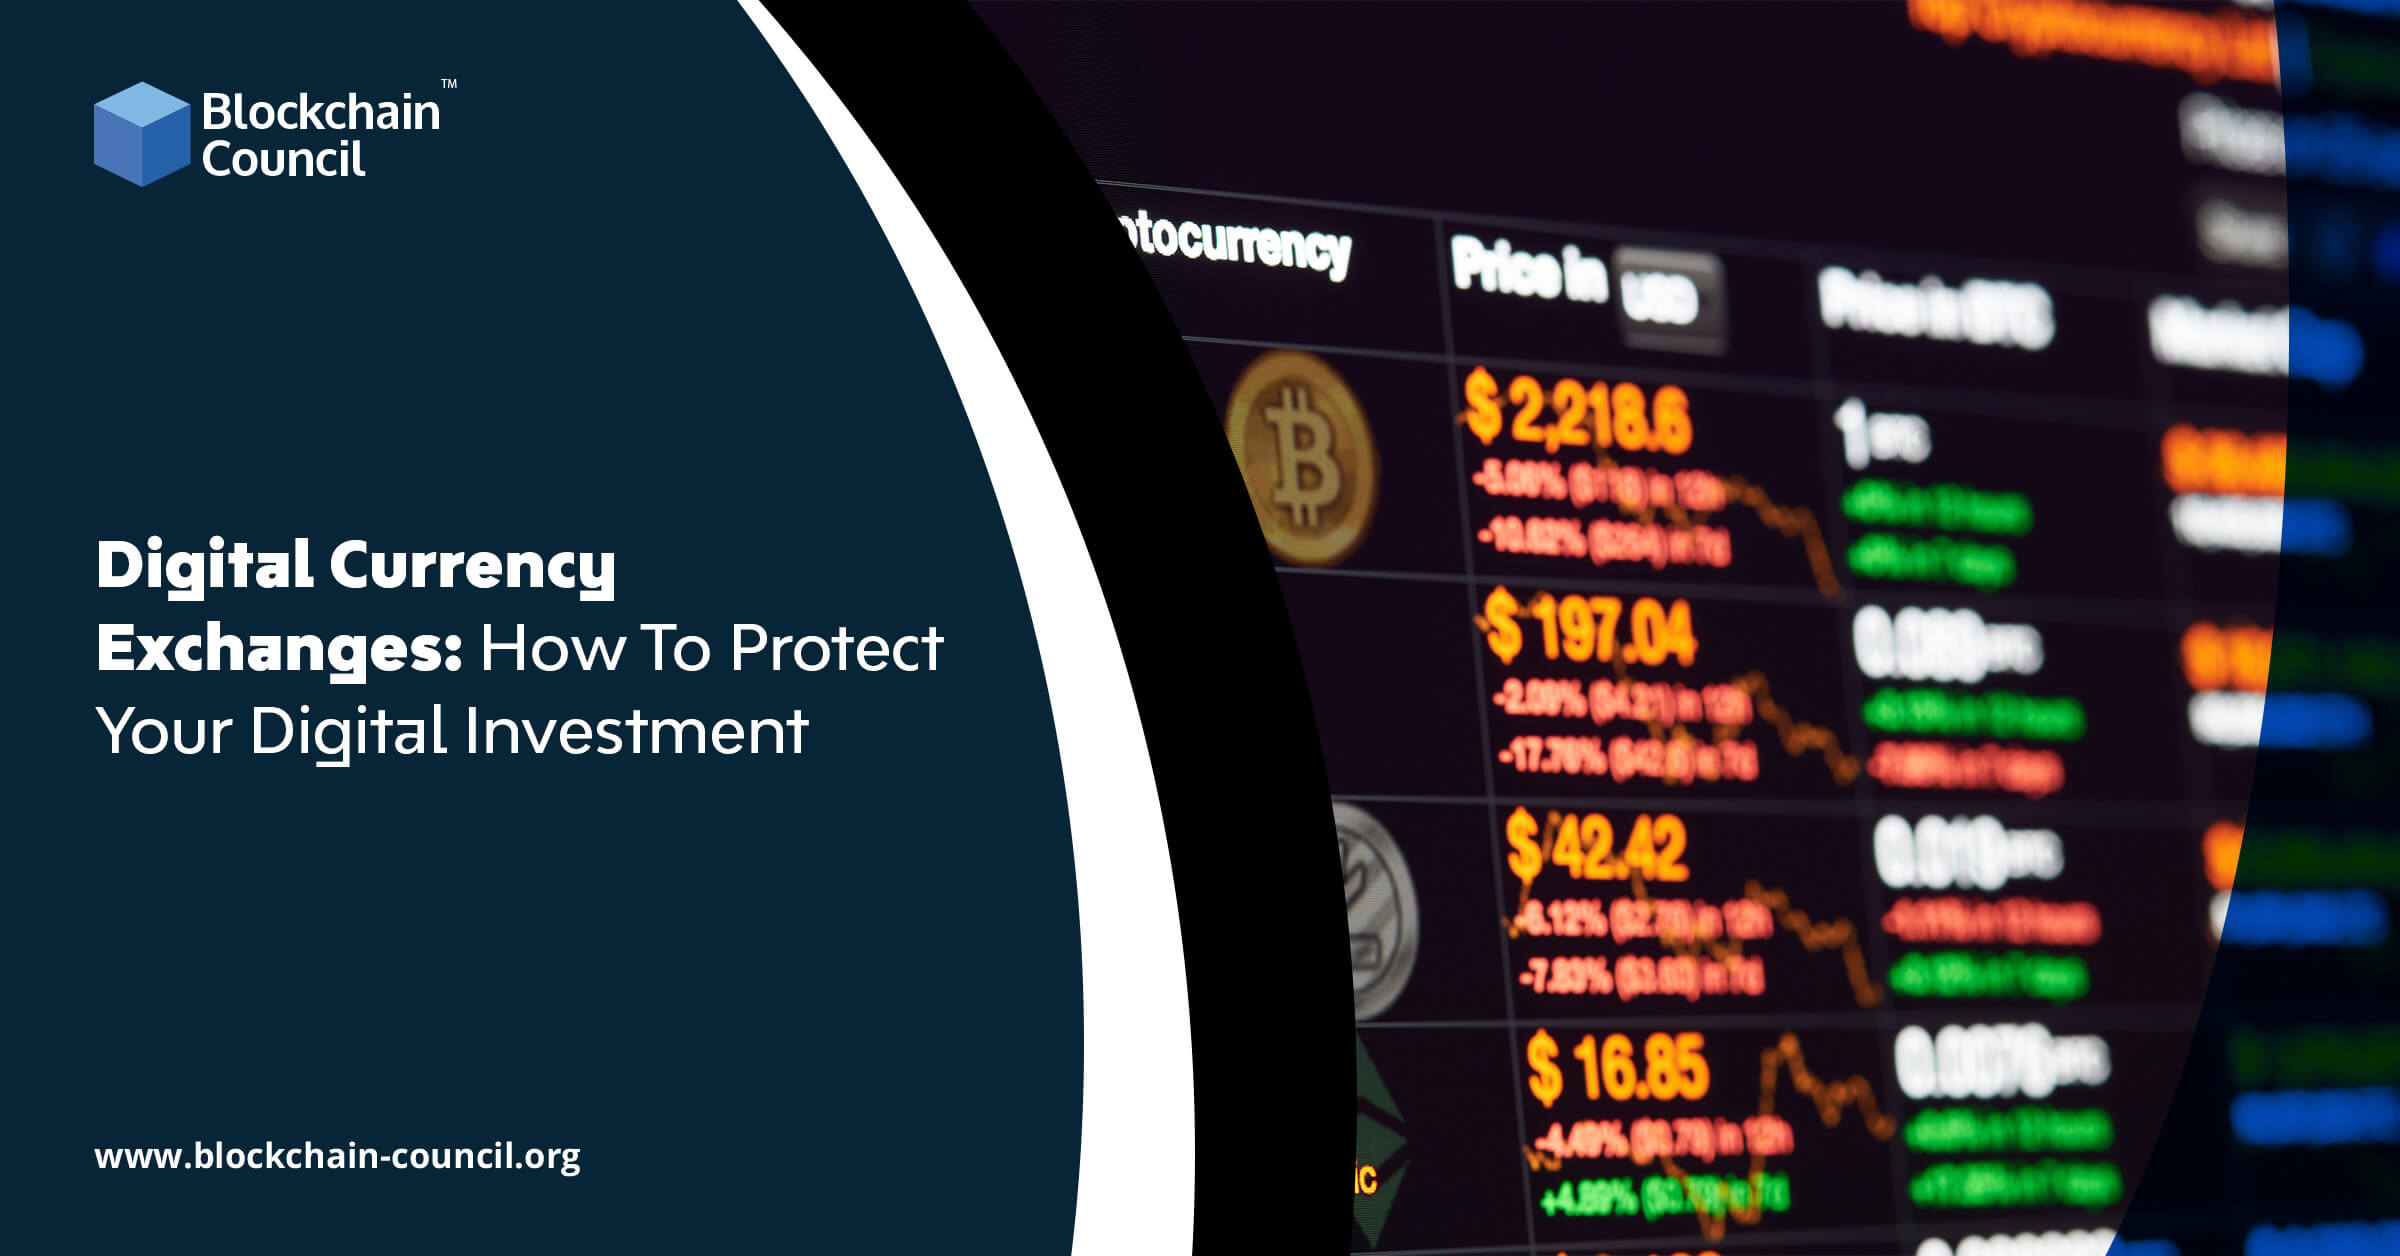 Digital Currency Exchanges: How To Protect Your Digital Investment